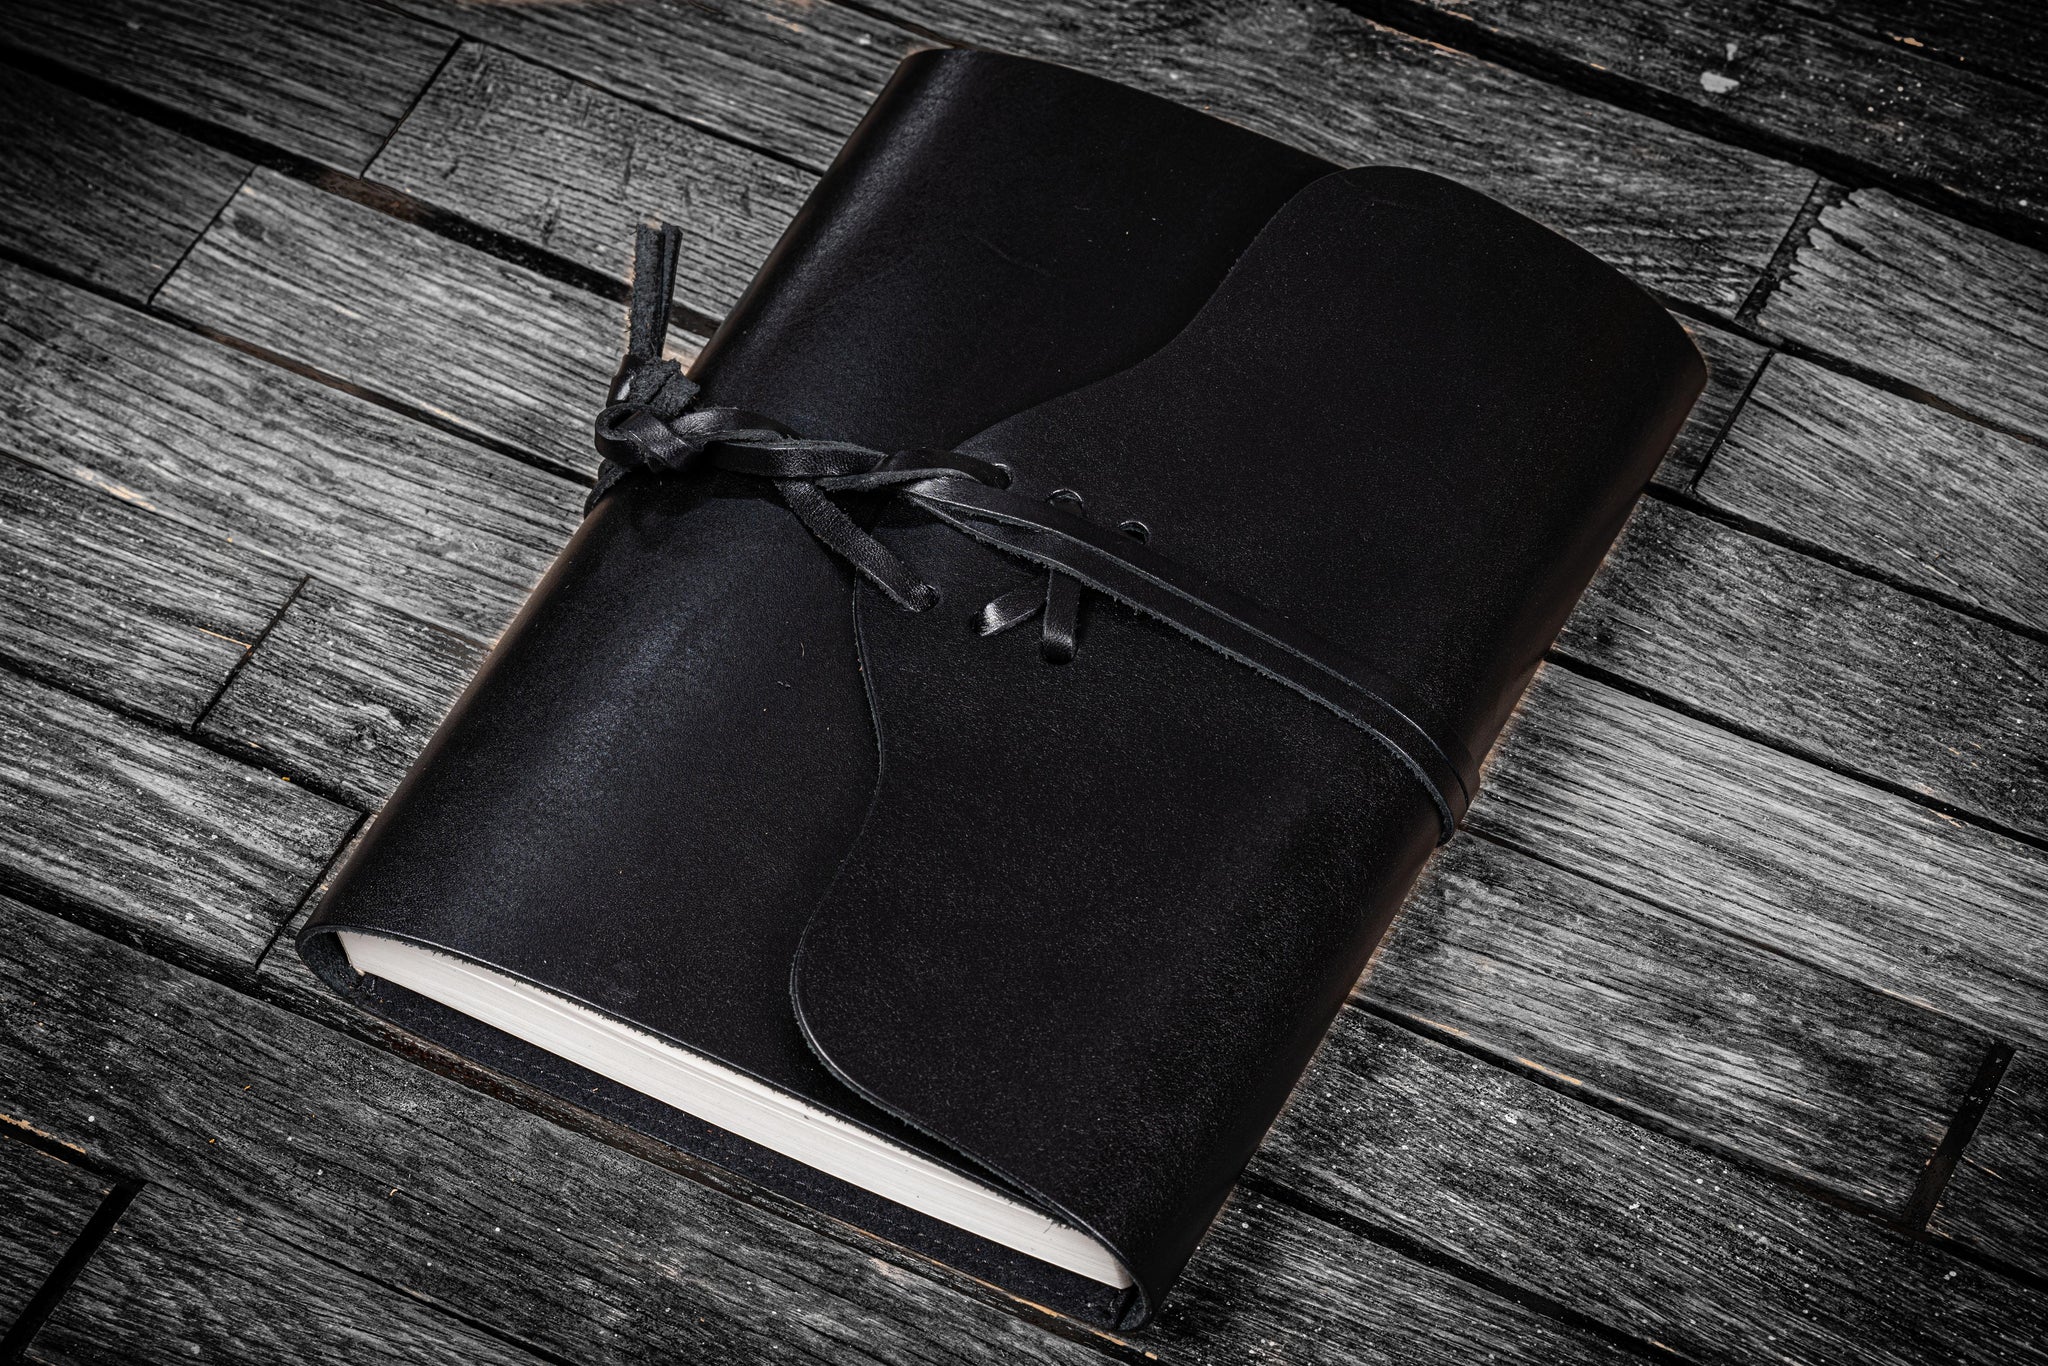 Black Refillable Leather Wrap Journal / Planner Cover